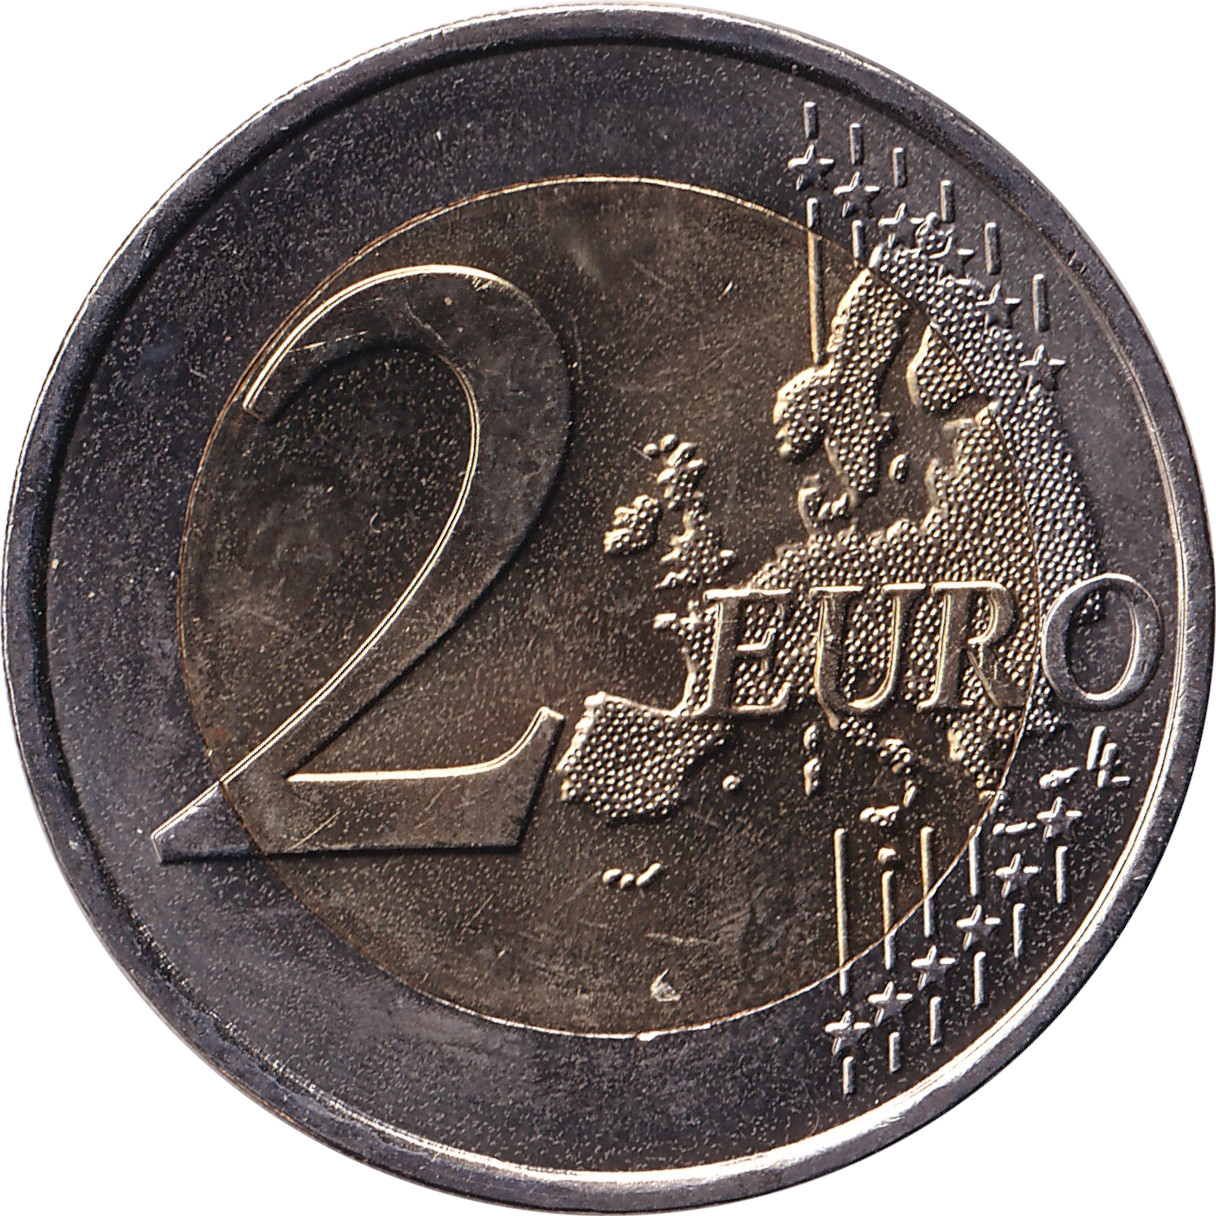 2 euro - D-Day - 70 years